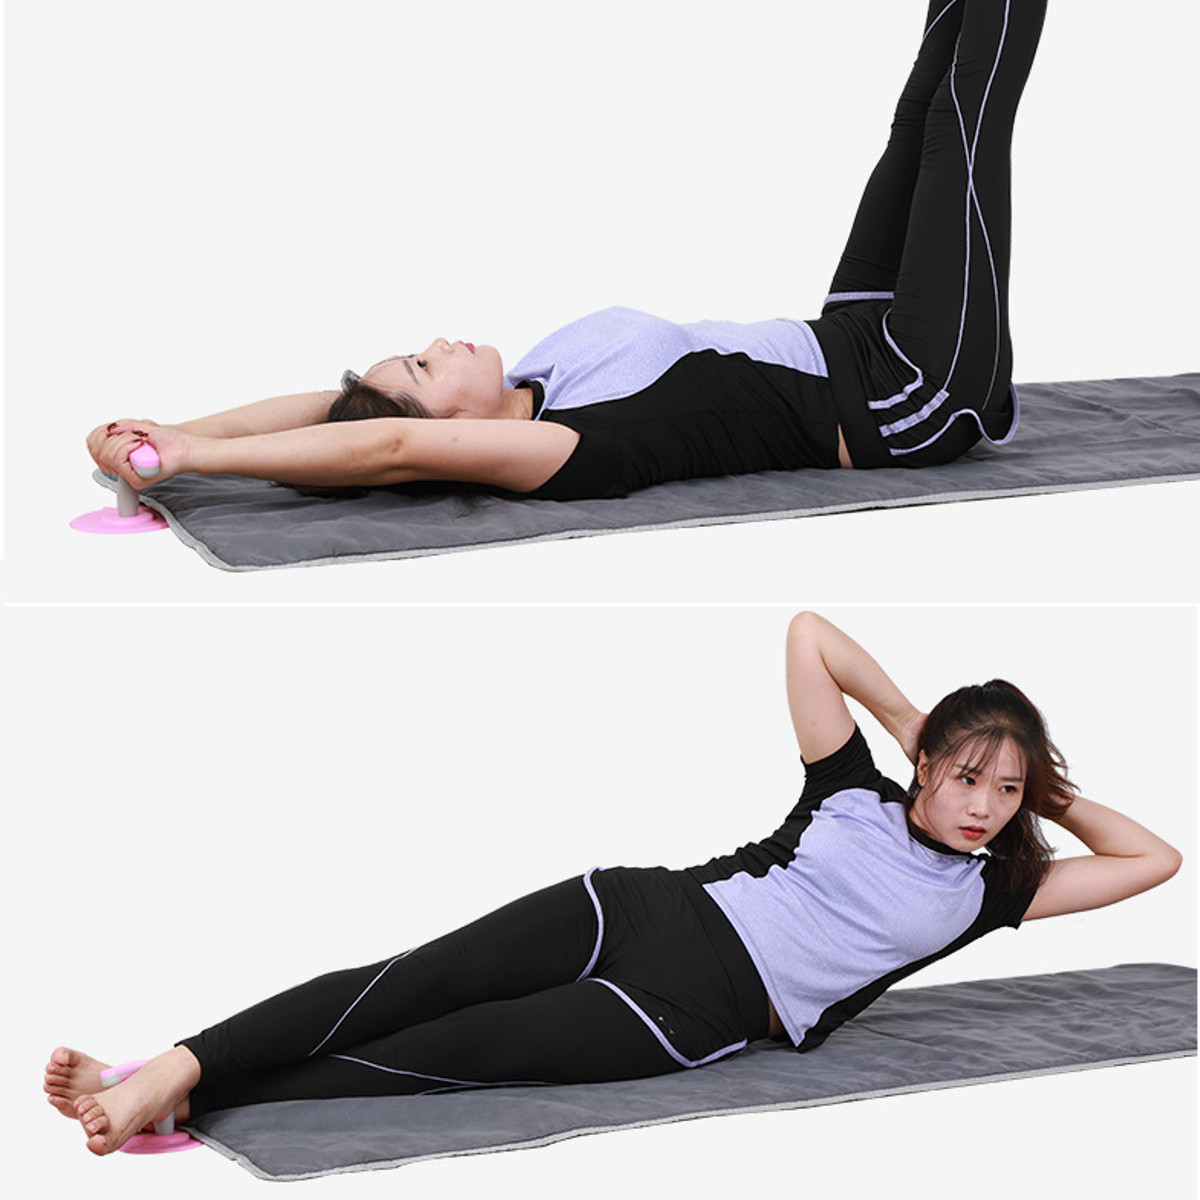 Muscle-Training-Sit-Up-Bars-Abdominal-Core-Strength-Sit-Up-Stand-Assistant-Home-Fitness-Exercise-Too-1672075-9